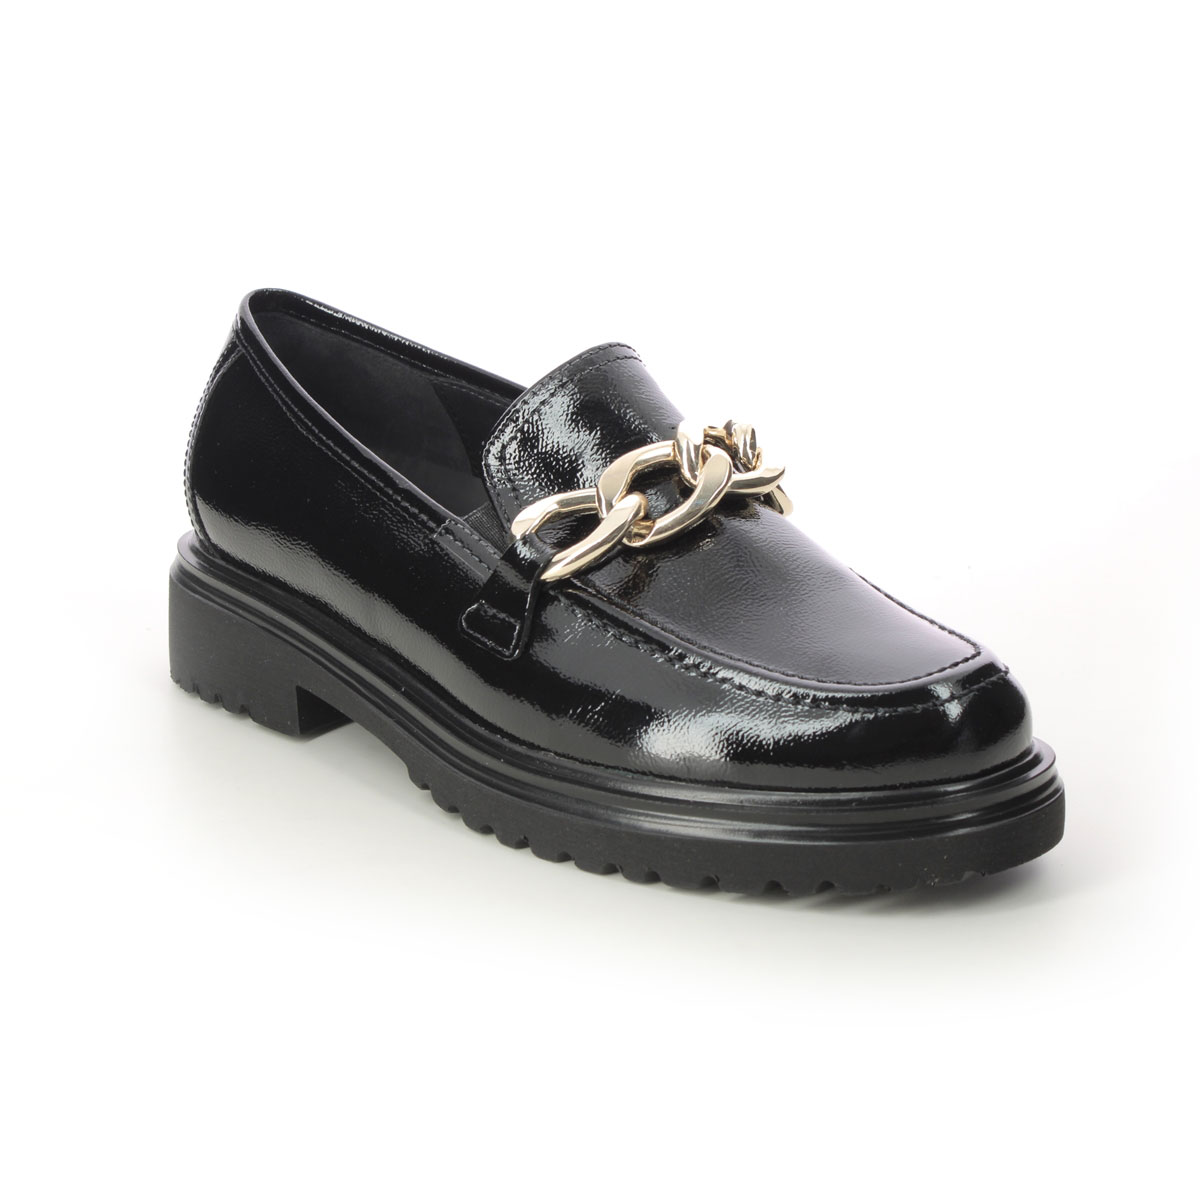 Gabor Florida H Black Patent Womens Loafers 92.554.97 In Size 6 In Plain Black Patent  Womens Comfort Slip On Shoes In Soft Black Patent Leather